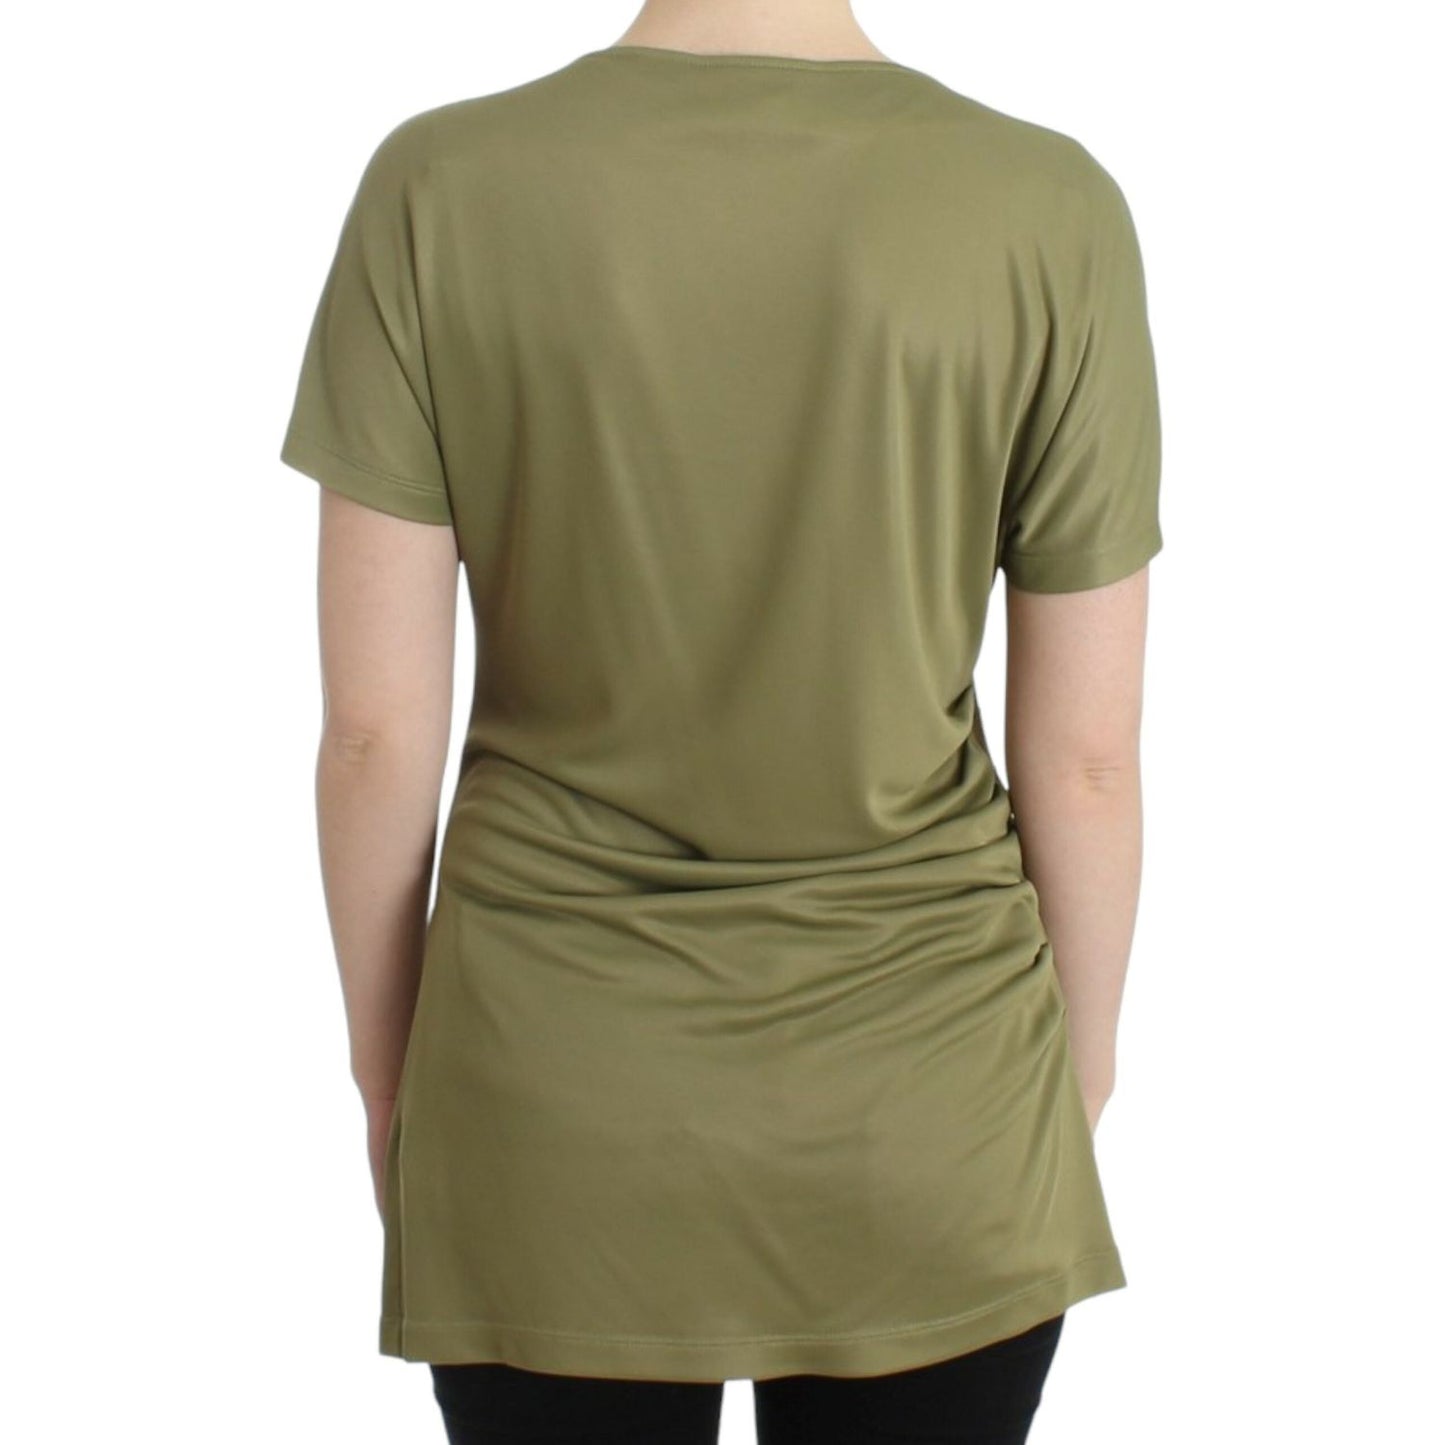 Cavalli Elegant Green Jersey Blouse with Gold Accents green-blouse-top